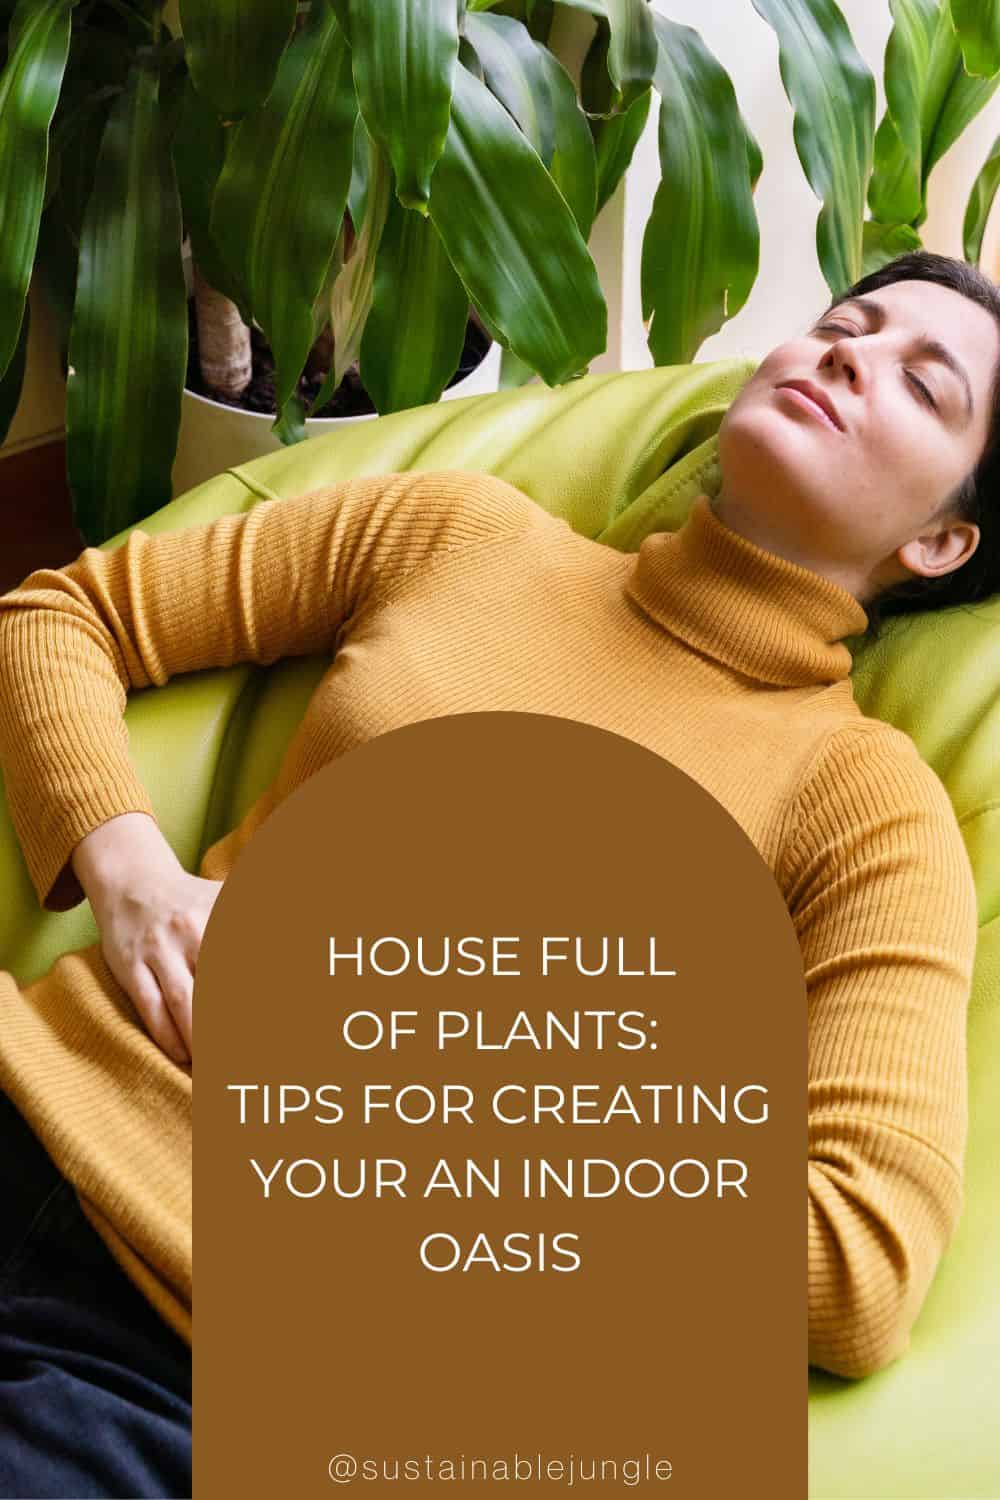 House Full of Plants: Tips For Creating Your An Indoor Oasis Image by beaveraphotos #housefullofplants #plantfilledhouse #houseswithplants #housewithplants #houseofplants #roomwithplants #sustainablejungle